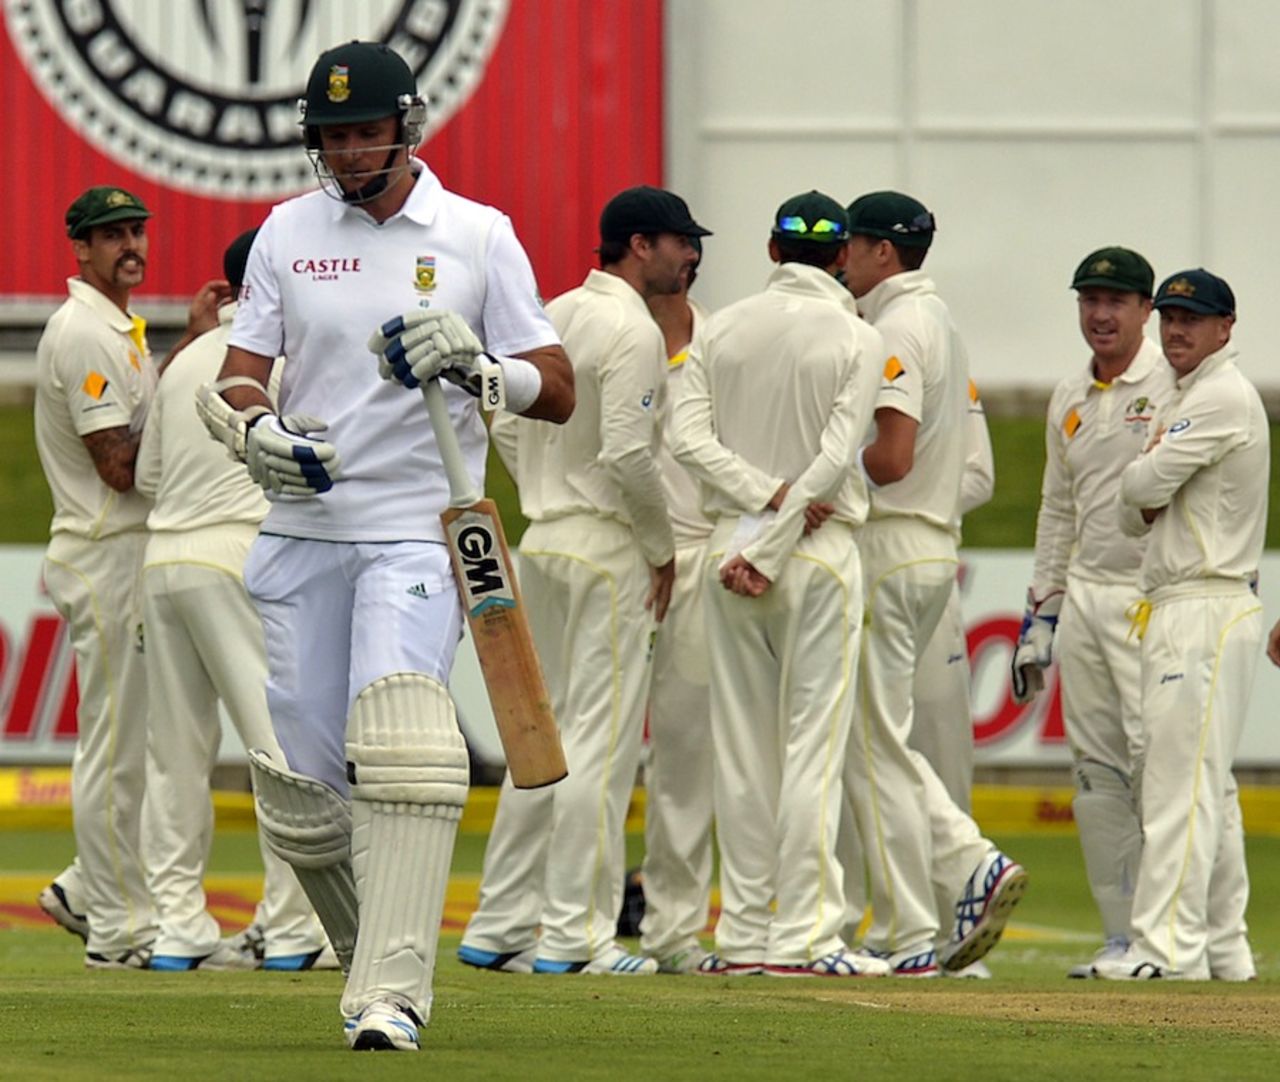 Graeme Smith walks off after he was out lbw, South Africa v Australia, 2nd Test, Port Elizabeth, 1st day, February 20, 2014